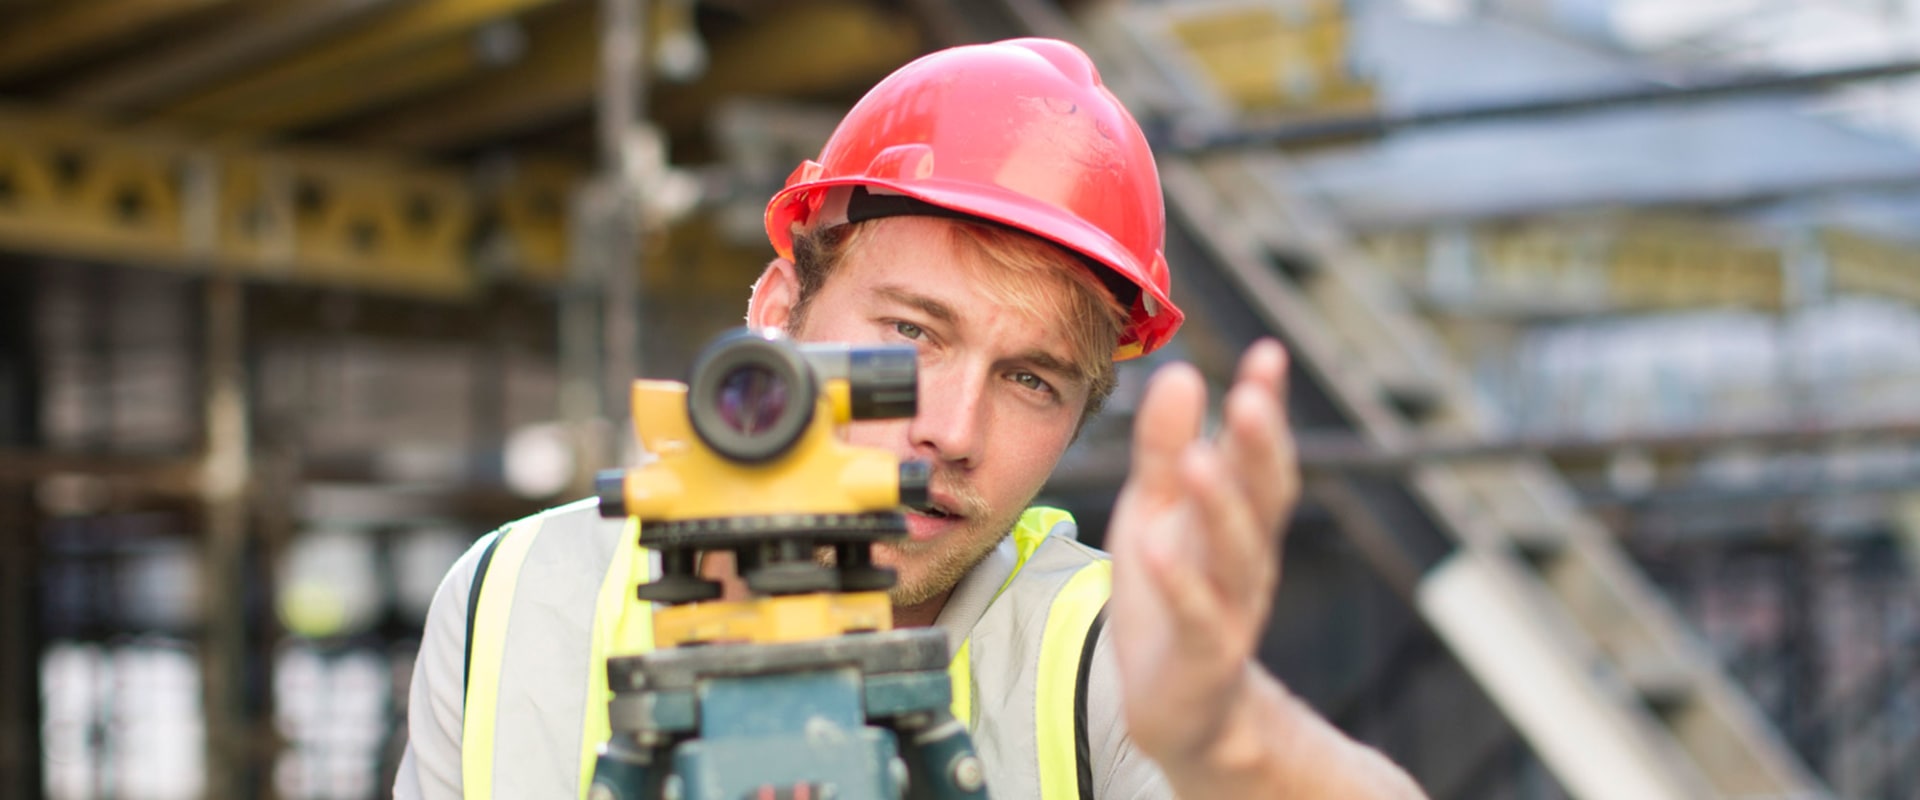 The Benefits Of Working With A Land Surveyor During A Construction Project In Brisbane